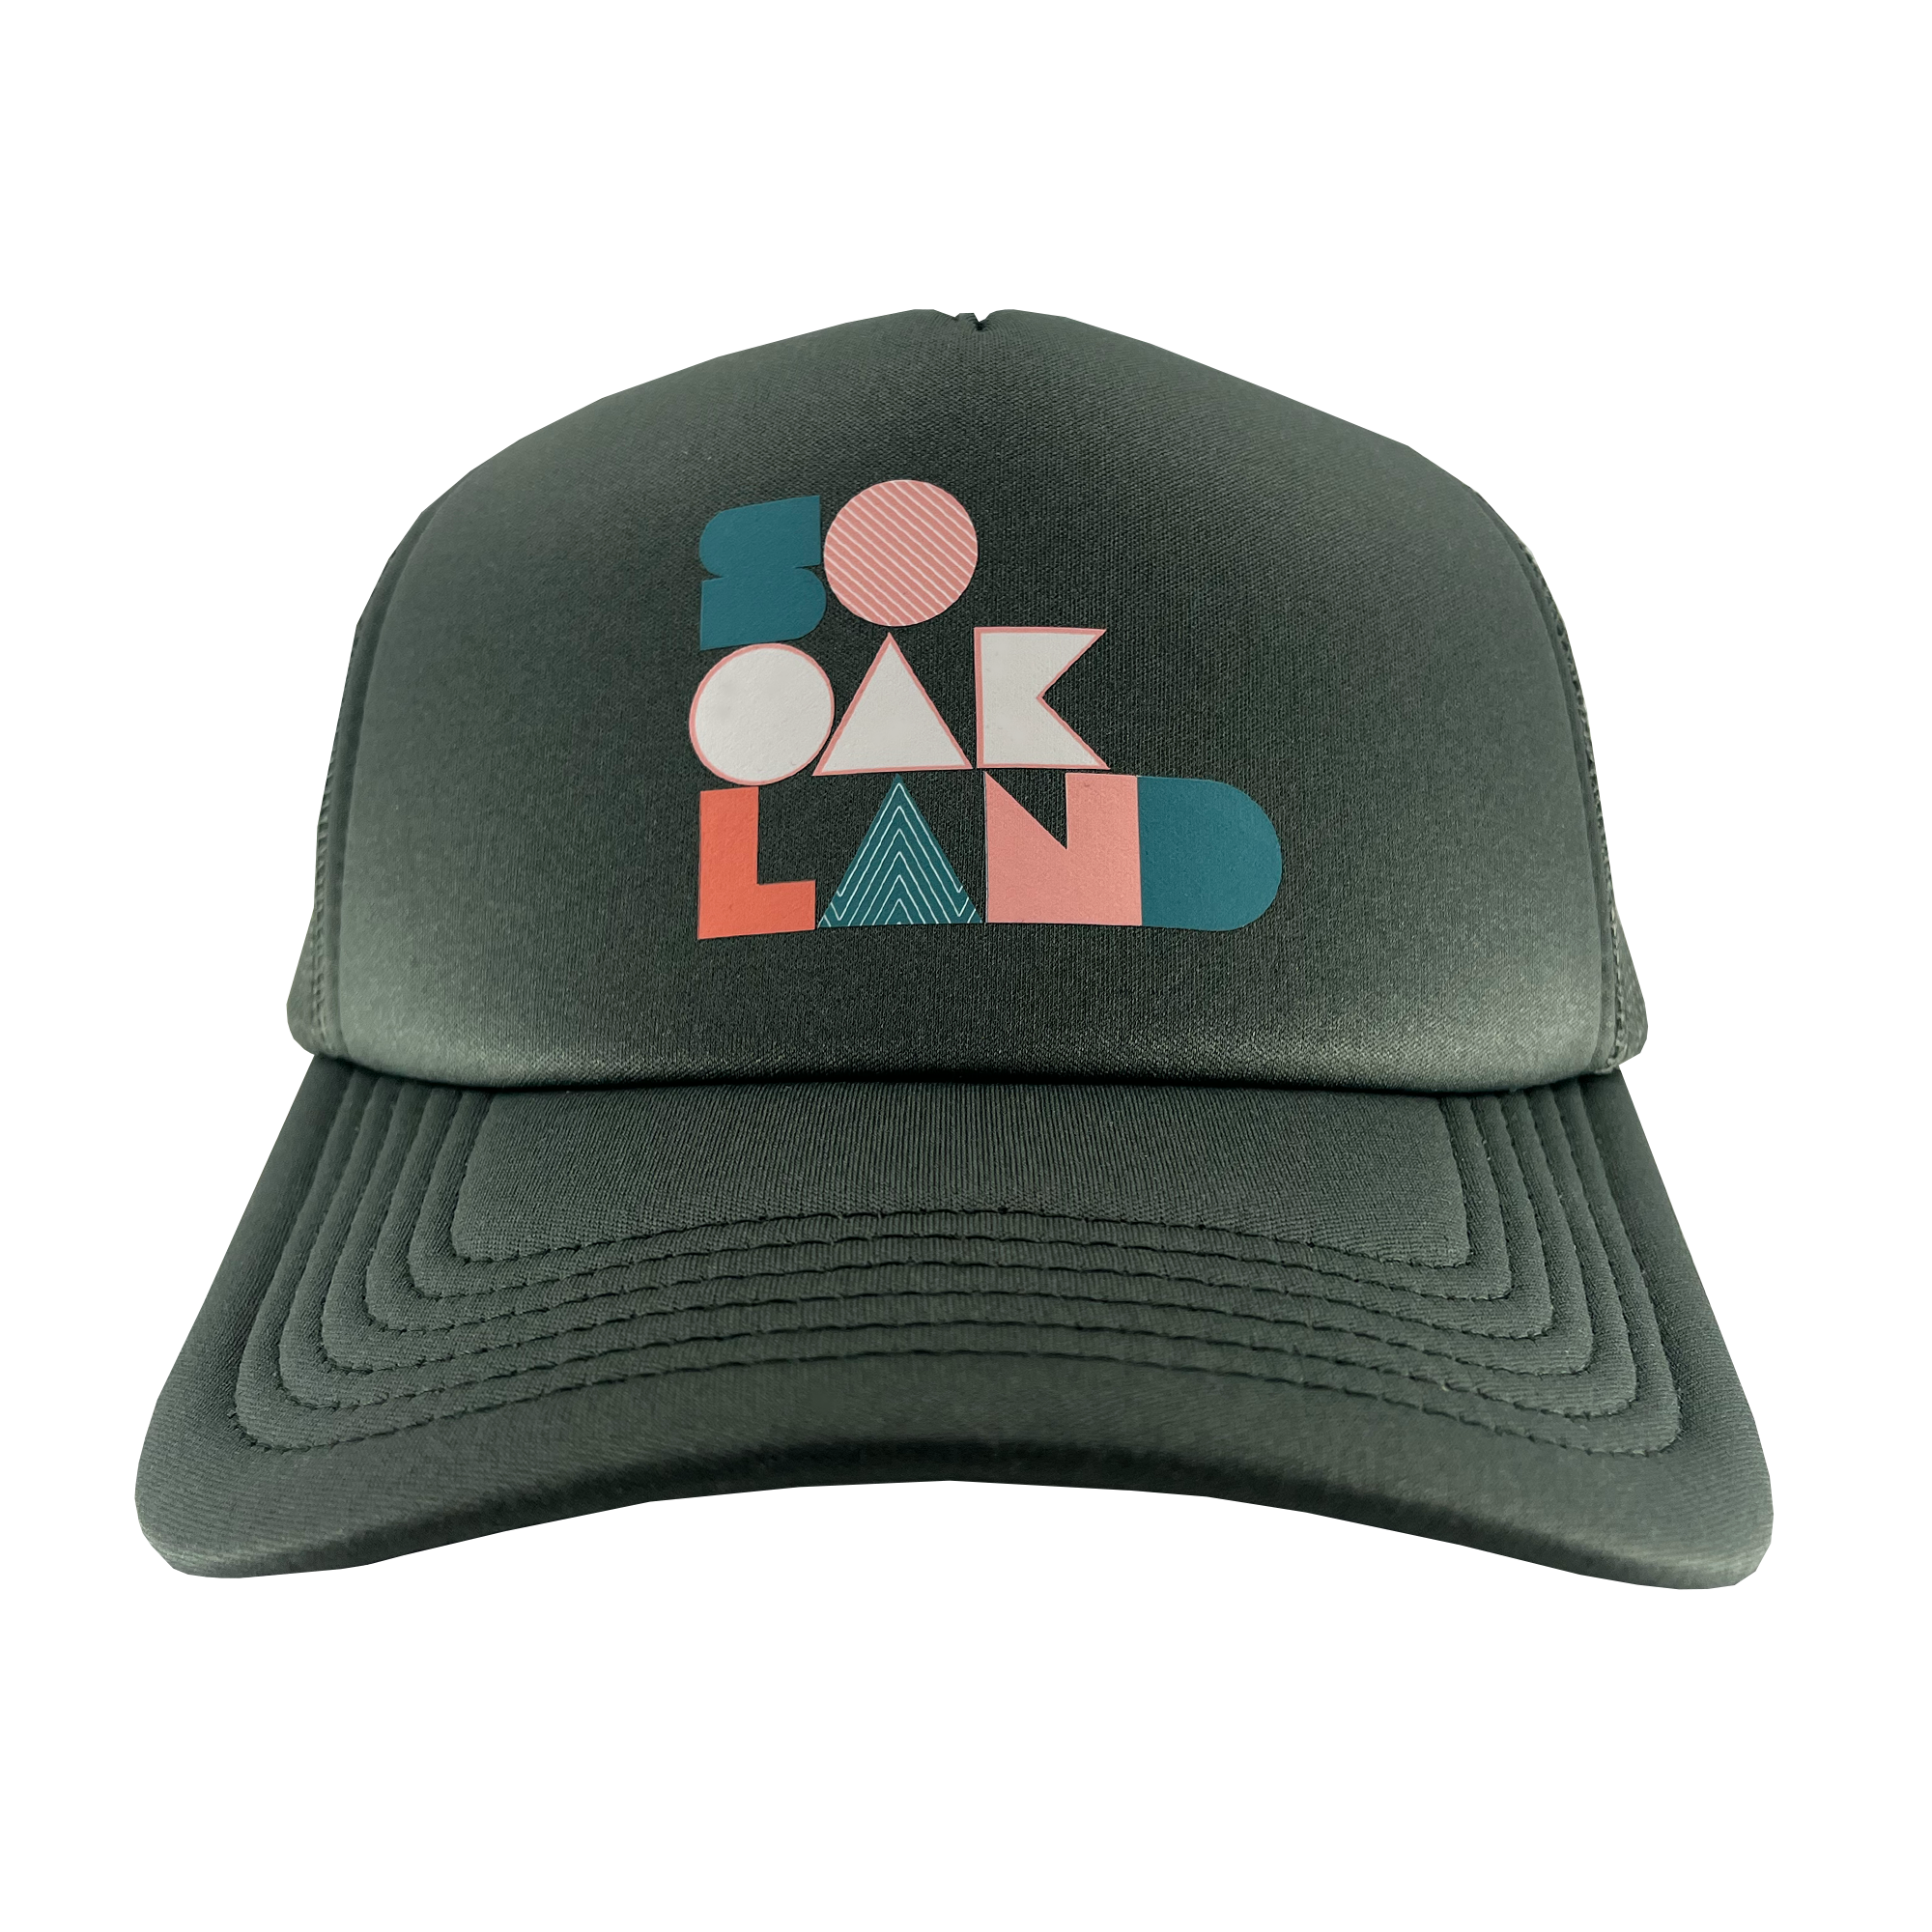 Front view of a cypress green trucker cap with full-color SoOakland wordmark in the crown.